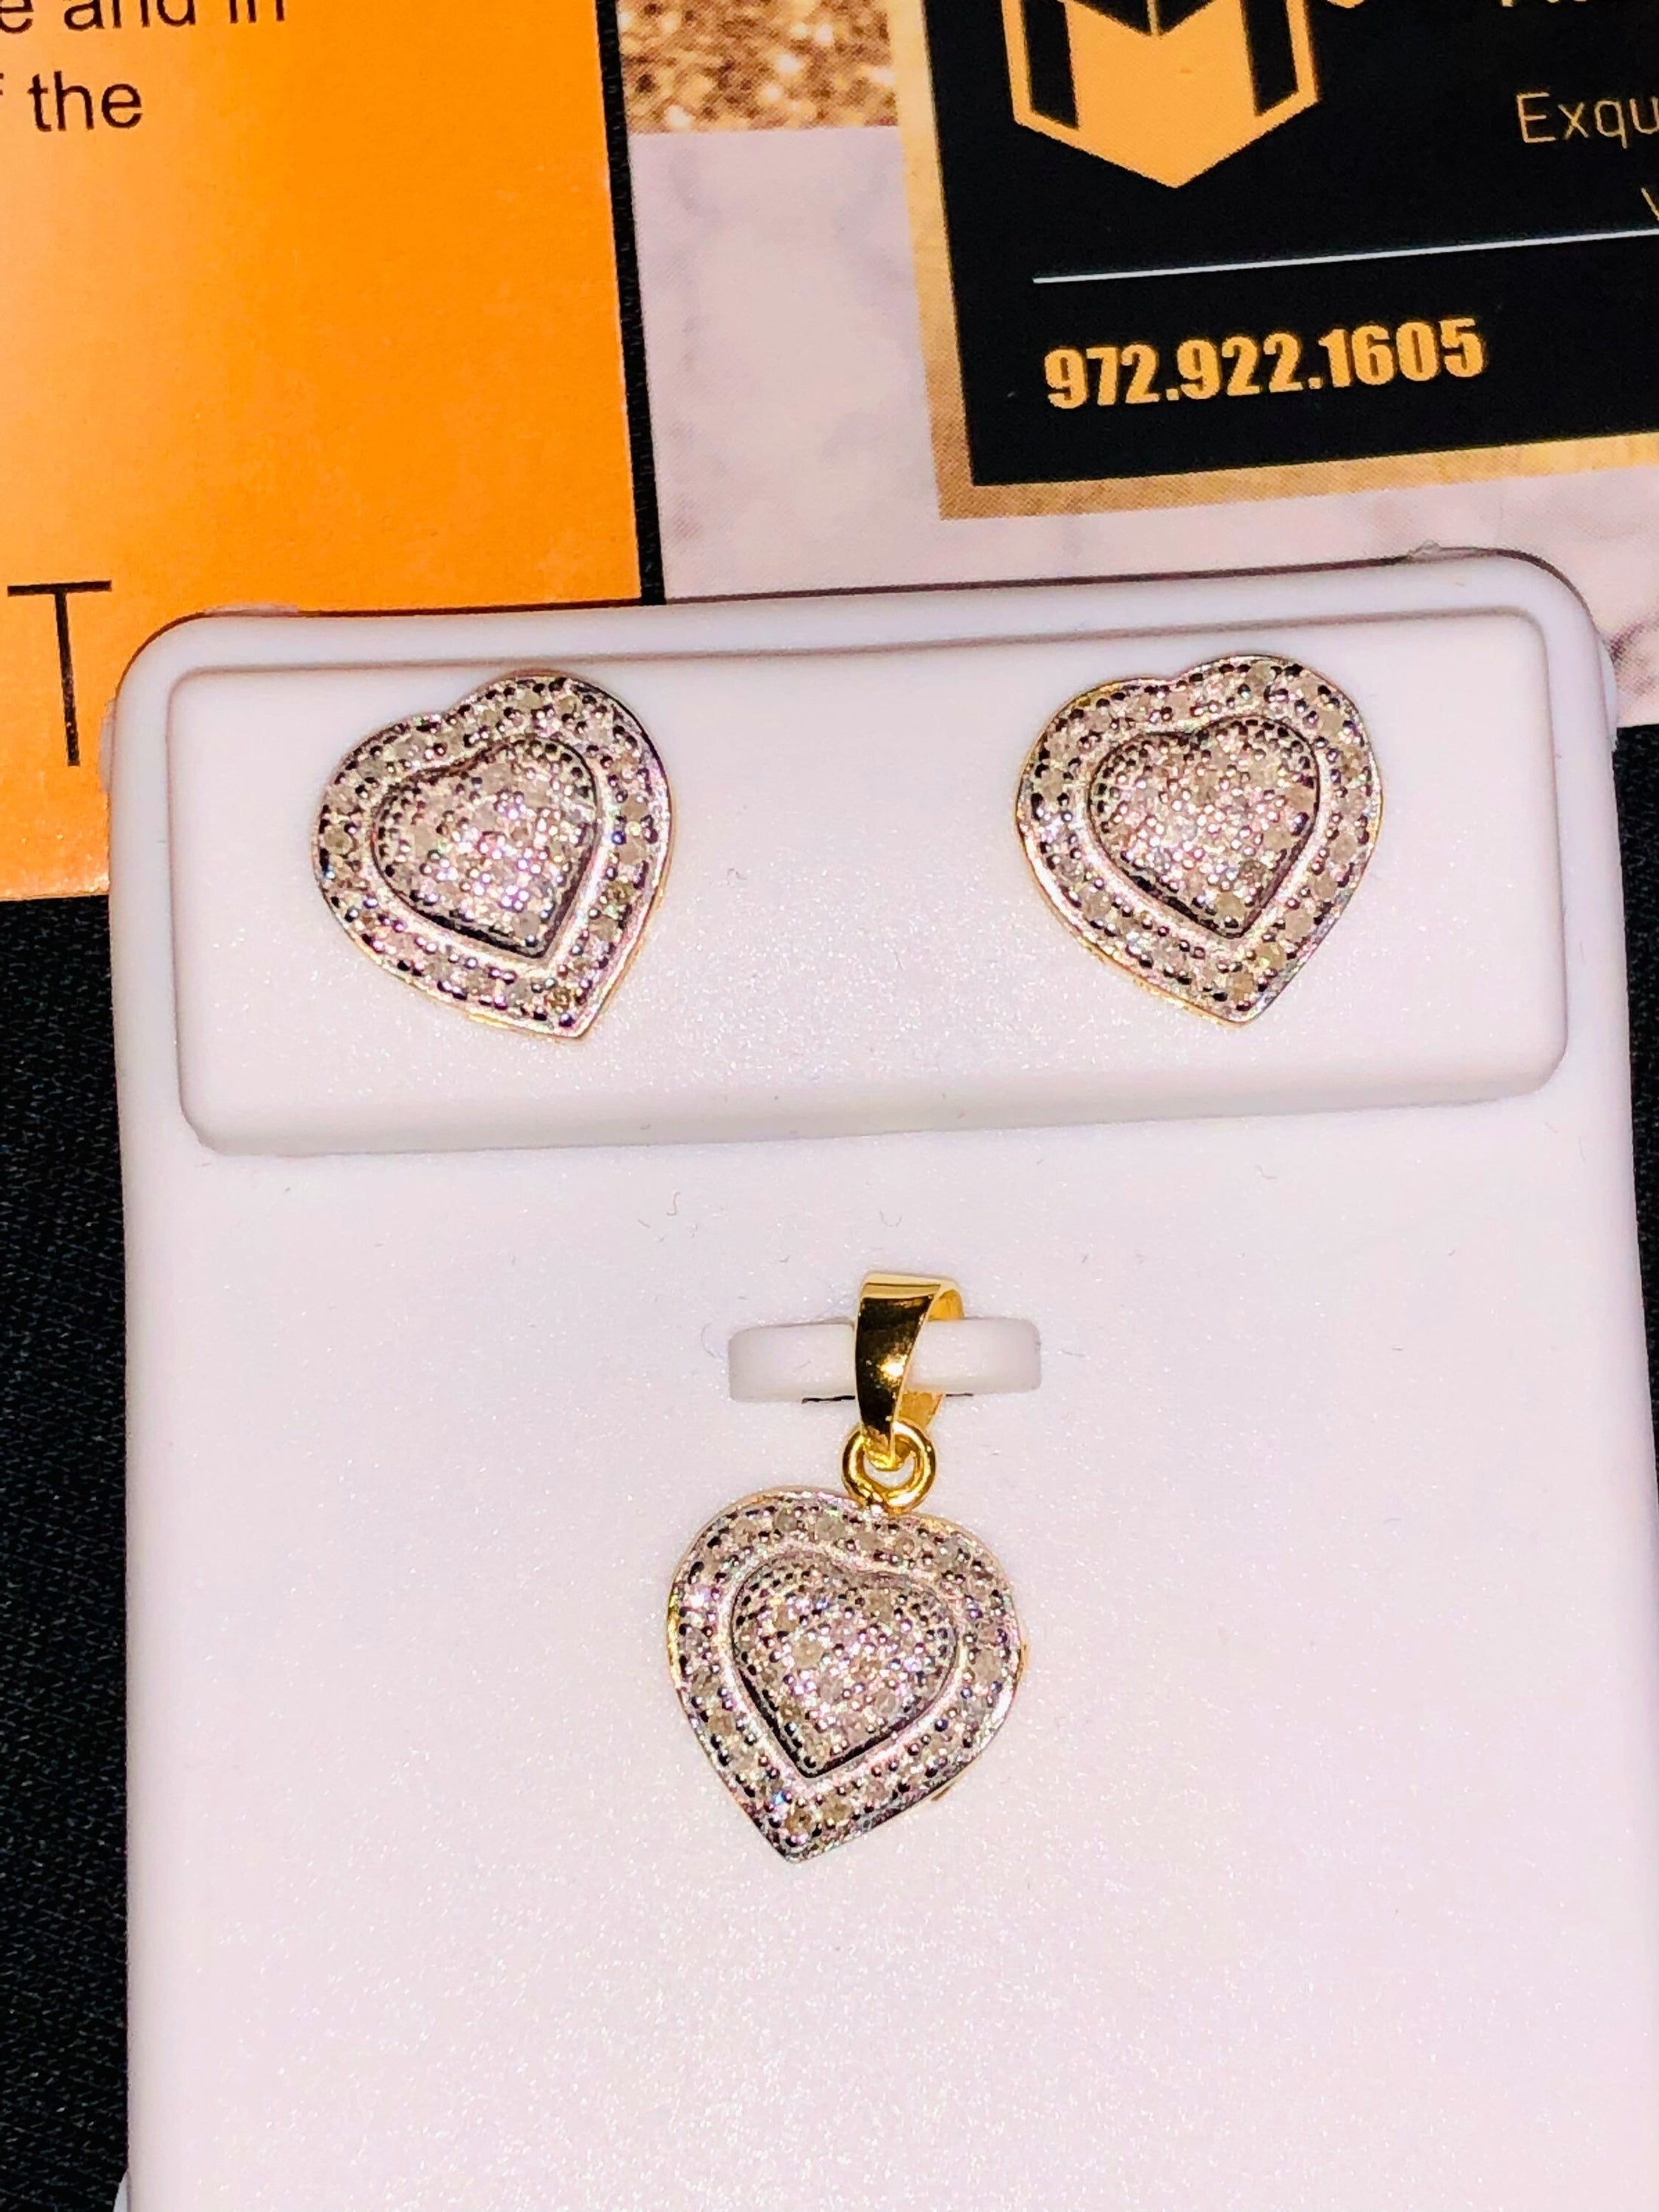 Real Diamond Gift for Women. Real Diamond Heart earrings and pendant set .40cttw Natural diamonds, NOT CZ not lab made, best gift for women